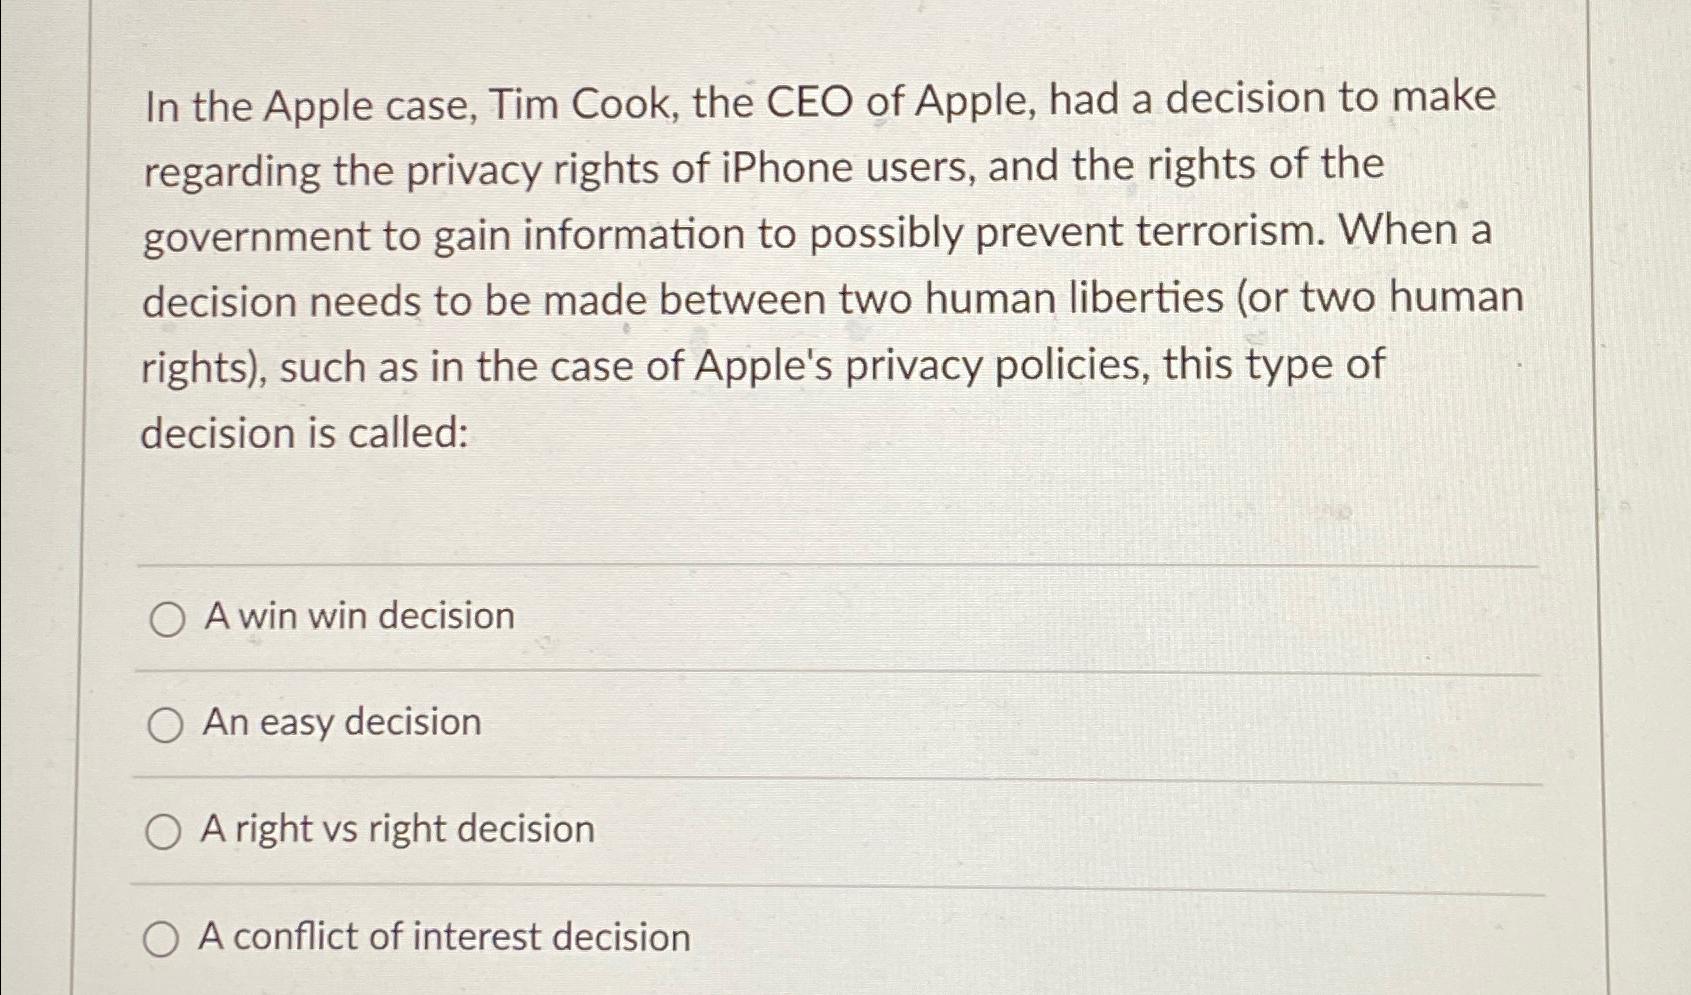 In the Apple case, Tim Cook, the CEO of Apple, had a decision to make regarding the privacy rights of iPhone